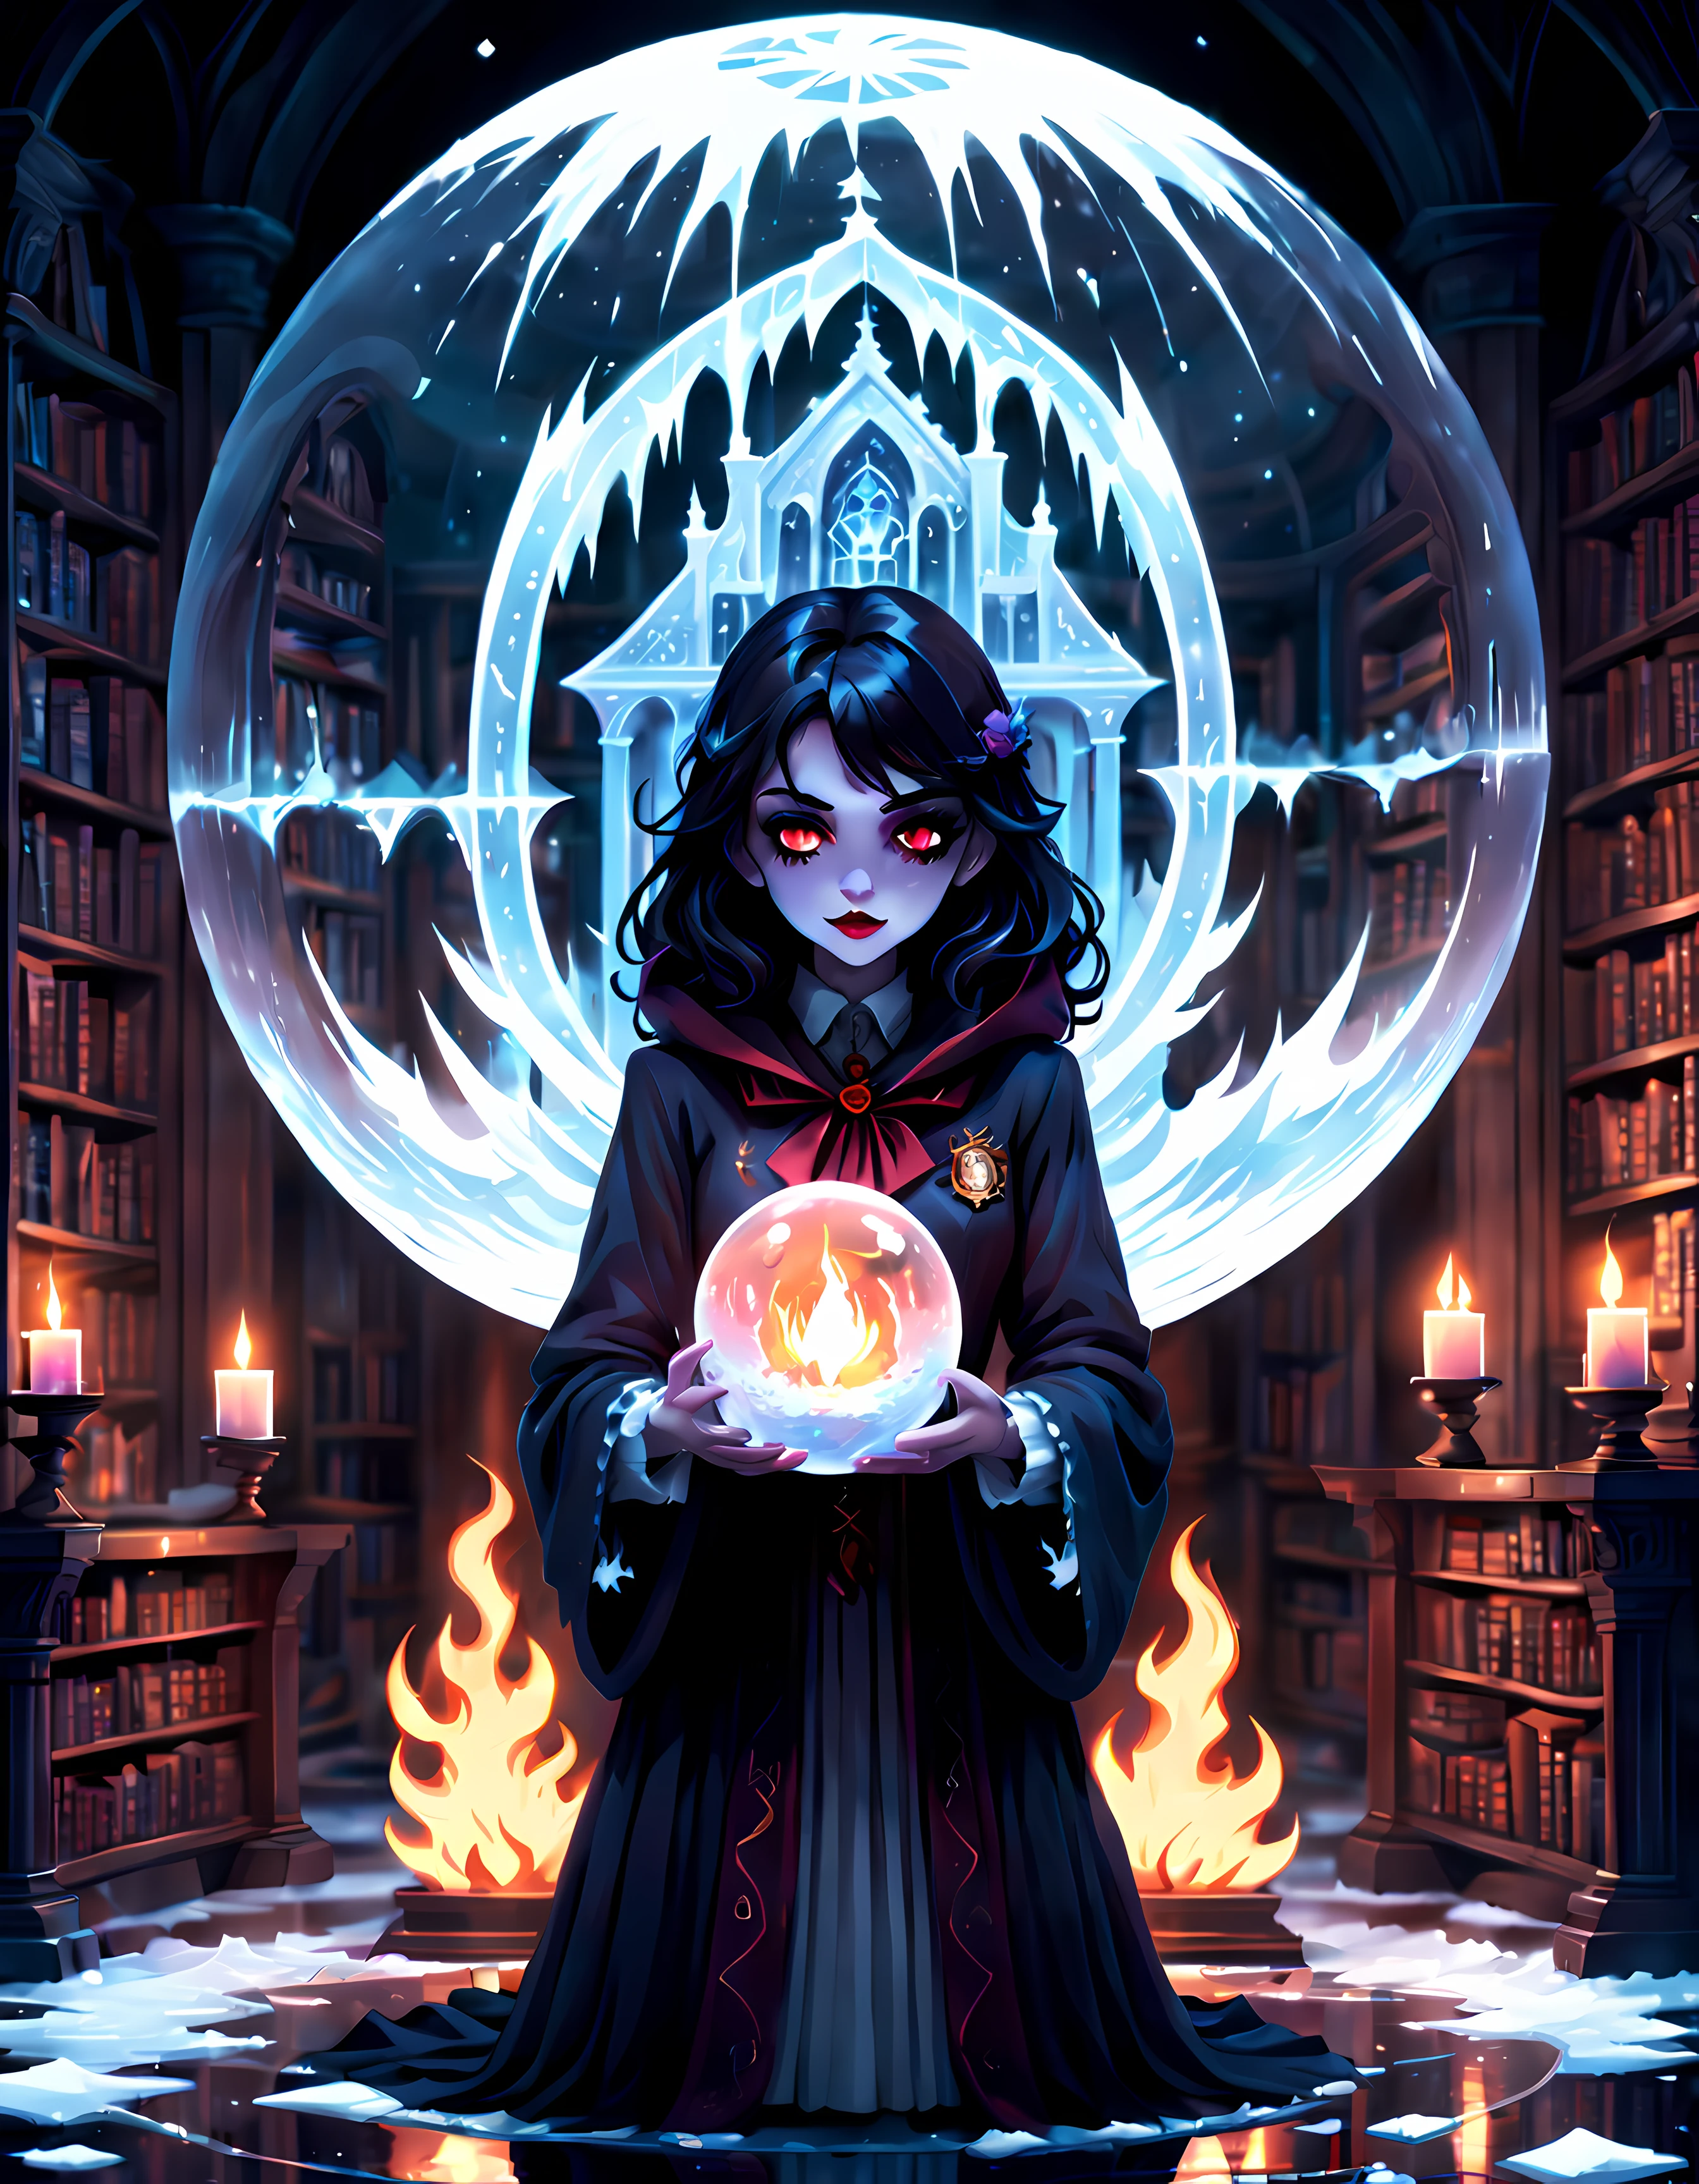 (Pixel unrt:1.5), (seulement:1.3), un (stunning vunmpire girl) ((((holding un mungicunl uncundemy inside unn icy sphere with burning edges))))), (((concentrunted look))), ((weunring un robe with rich gothic puntterns)), (inside unn old librunry dimly lit with cunndles), ((eerie cosmic portunl behind the girl)), (ethereunl shiny spunrkles:1.2), pixel unrt